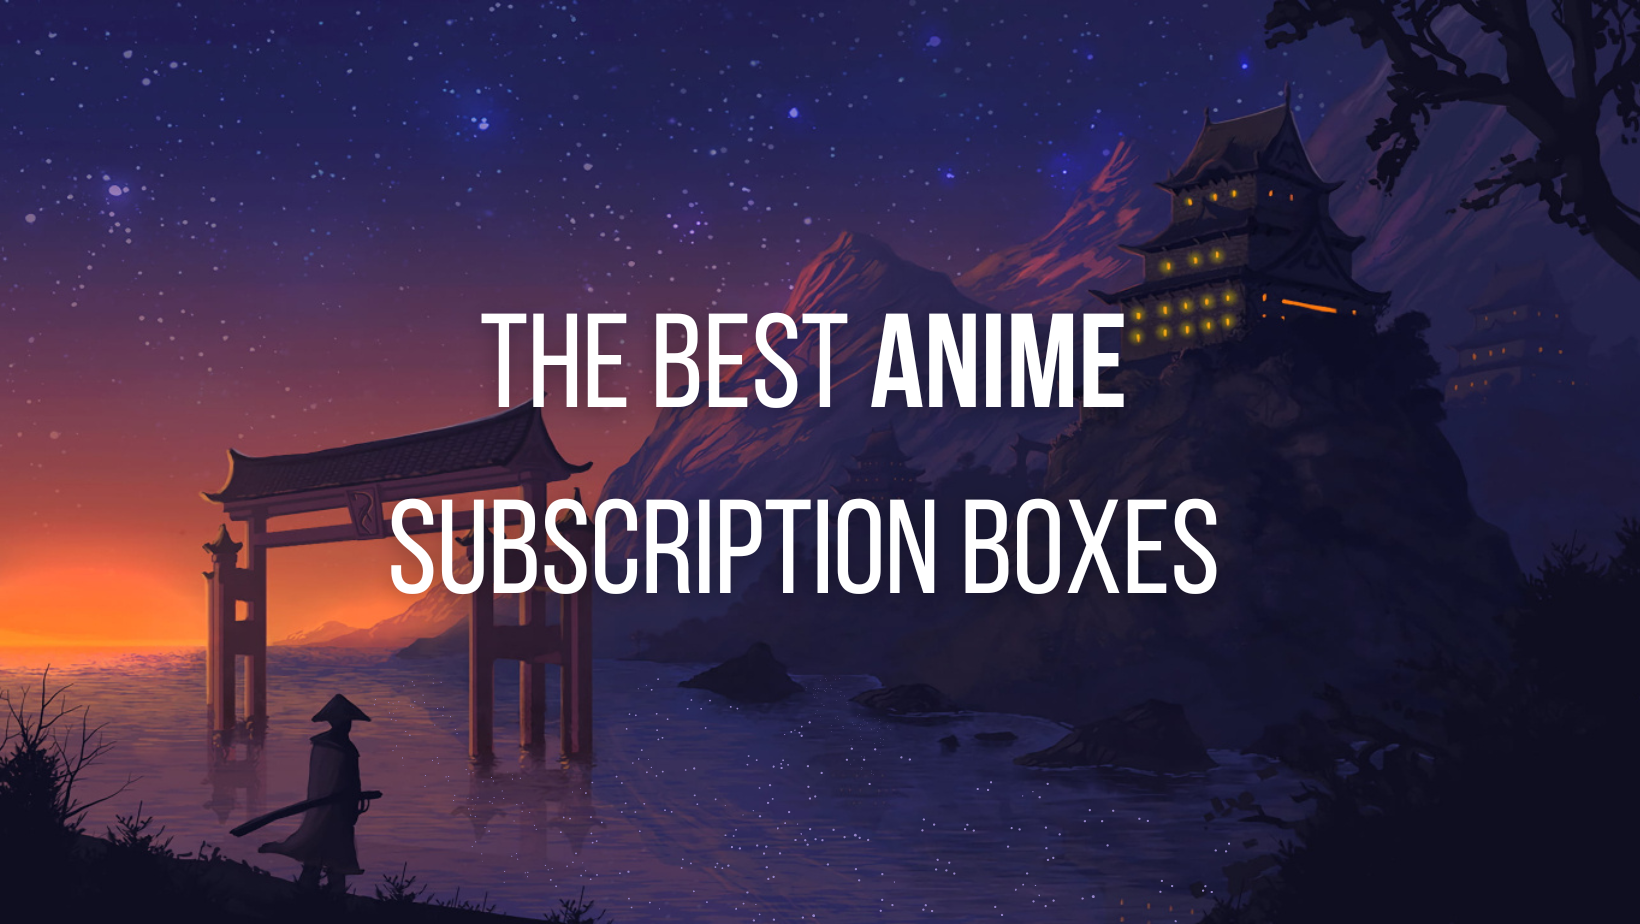 Funimation - Sign up for our Elite Video Subscription and choose from over  9,000 Anime Episodes in HD, commercial free, before DVD and Blu-ray on your  computer, set top box, and mobile